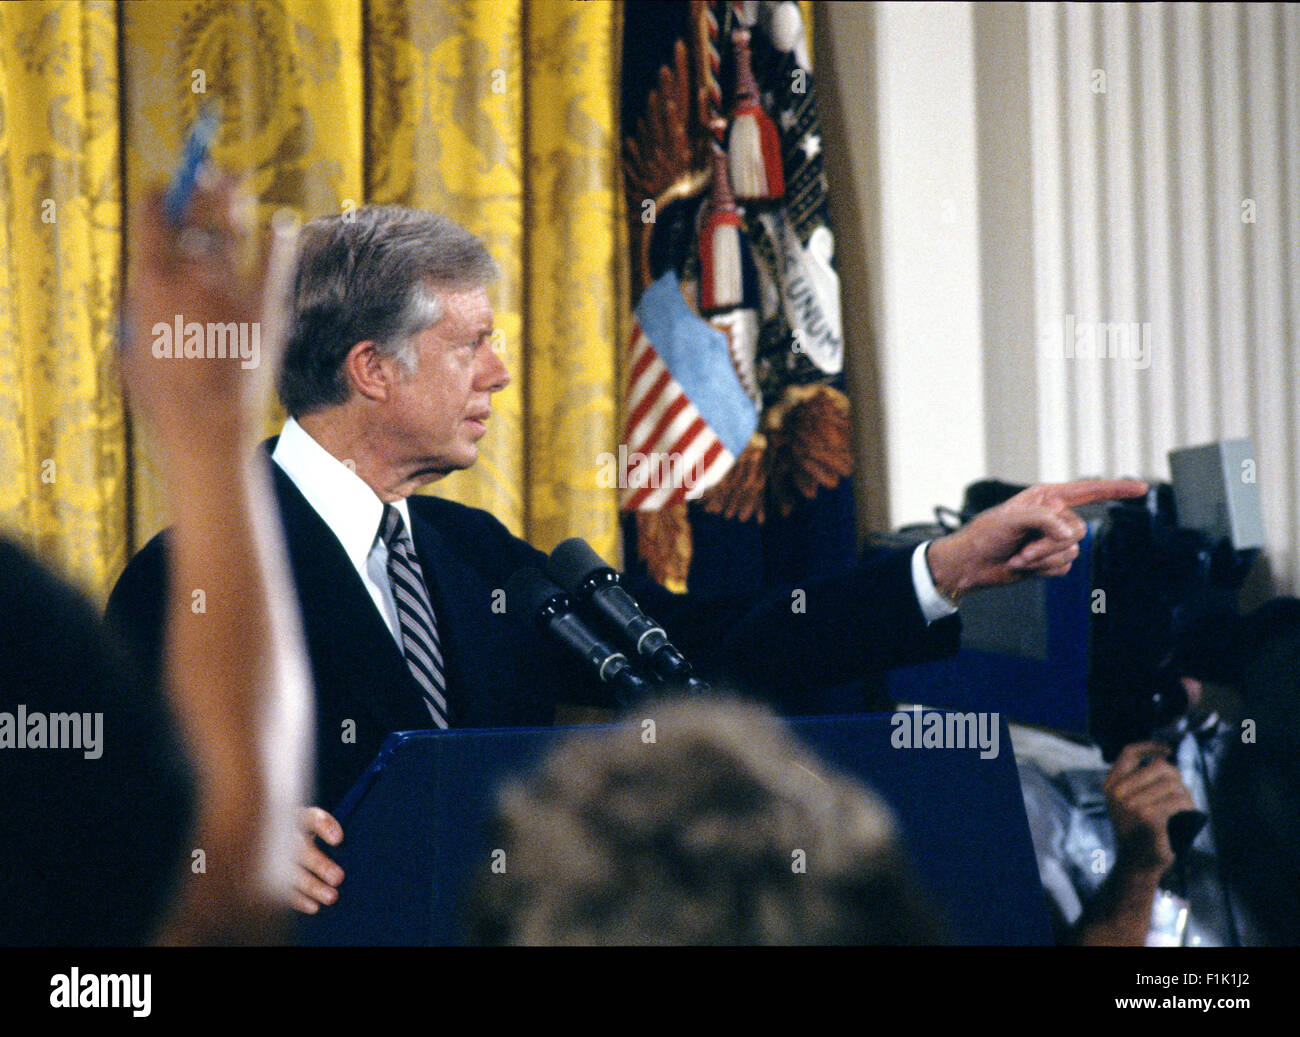 United States President Jimmy Carter holds a press conference in the East Room of the White House in Washington, DC on August 4, 1980. The President discussed the scandal surrounding his brother Billy. Carter said there was no impropriety in his brother's activities and insisted neither he nor any member of his administration broke any laws. The President went on to say his brother tried to free the American hostages being held in Iran through his dealings with the Libyans. Credit: Benjamin E. 'Gene' Forte/CNP - NO WIRE SERVICE - Stock Photo